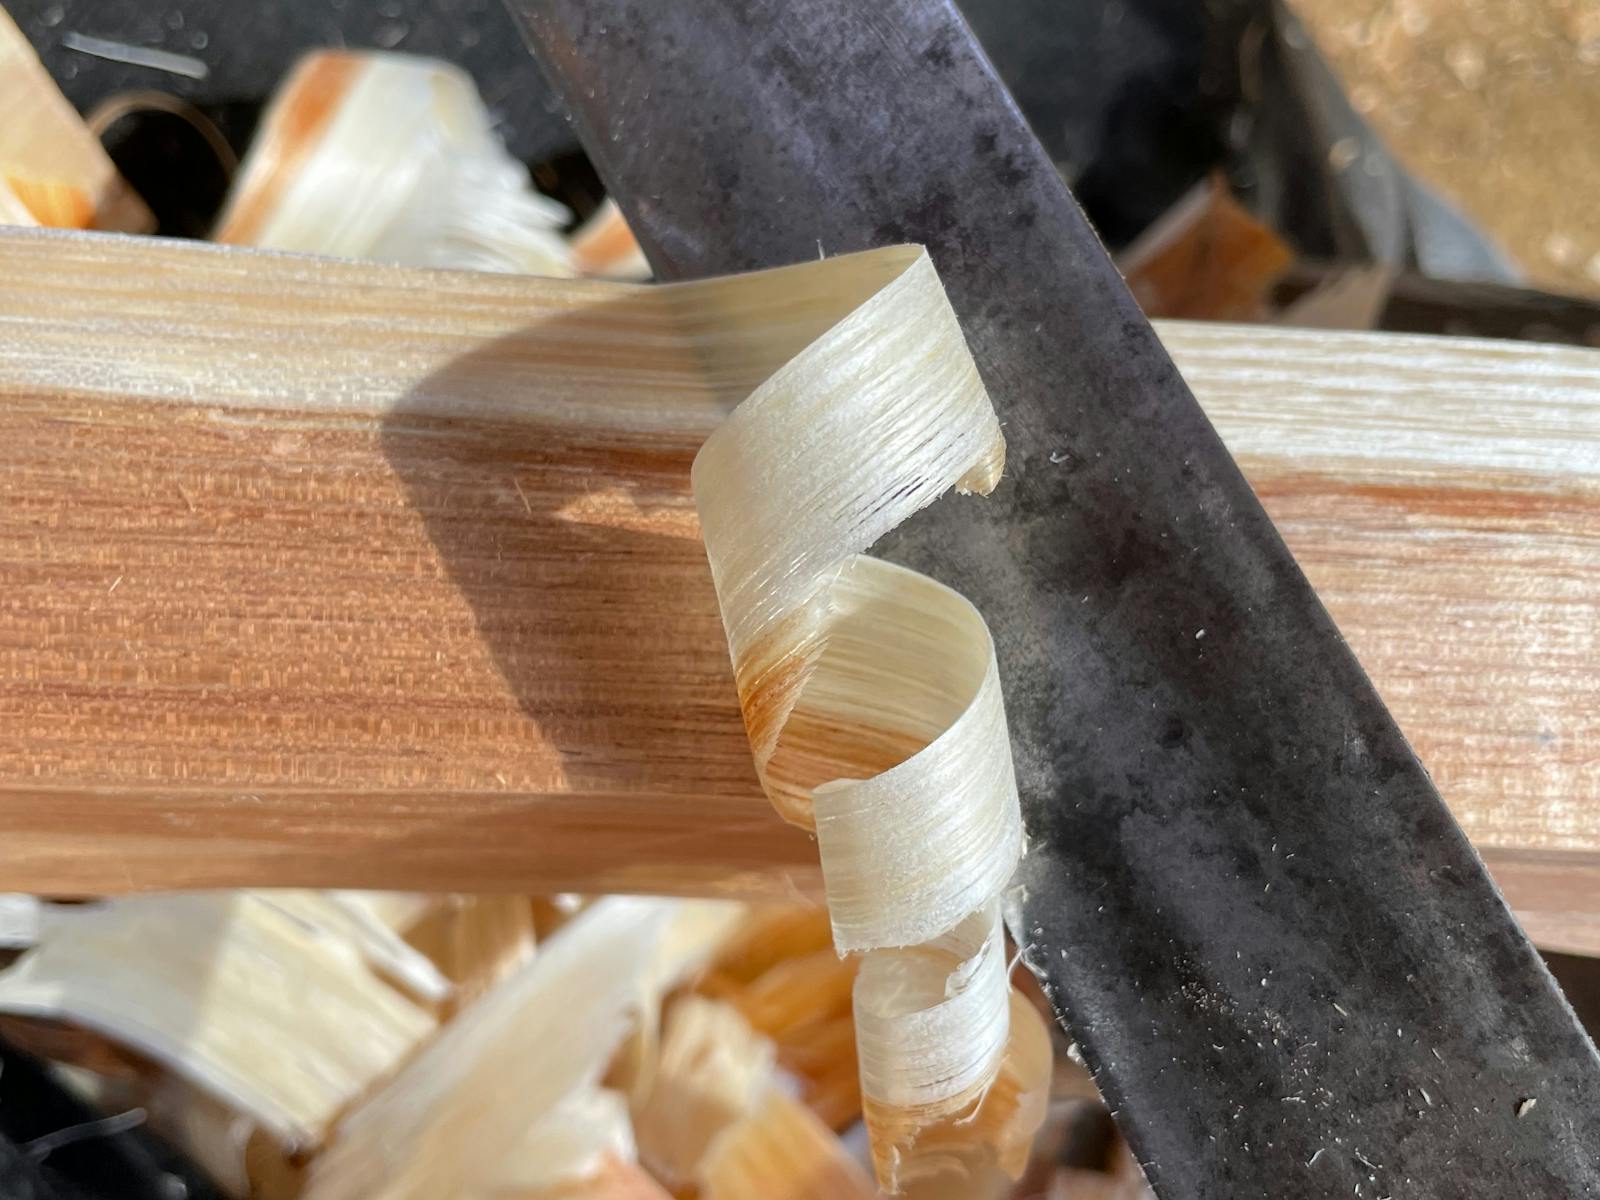 Shavings of Silver Wattle coming off a draw knife at Wisdom Through Wood